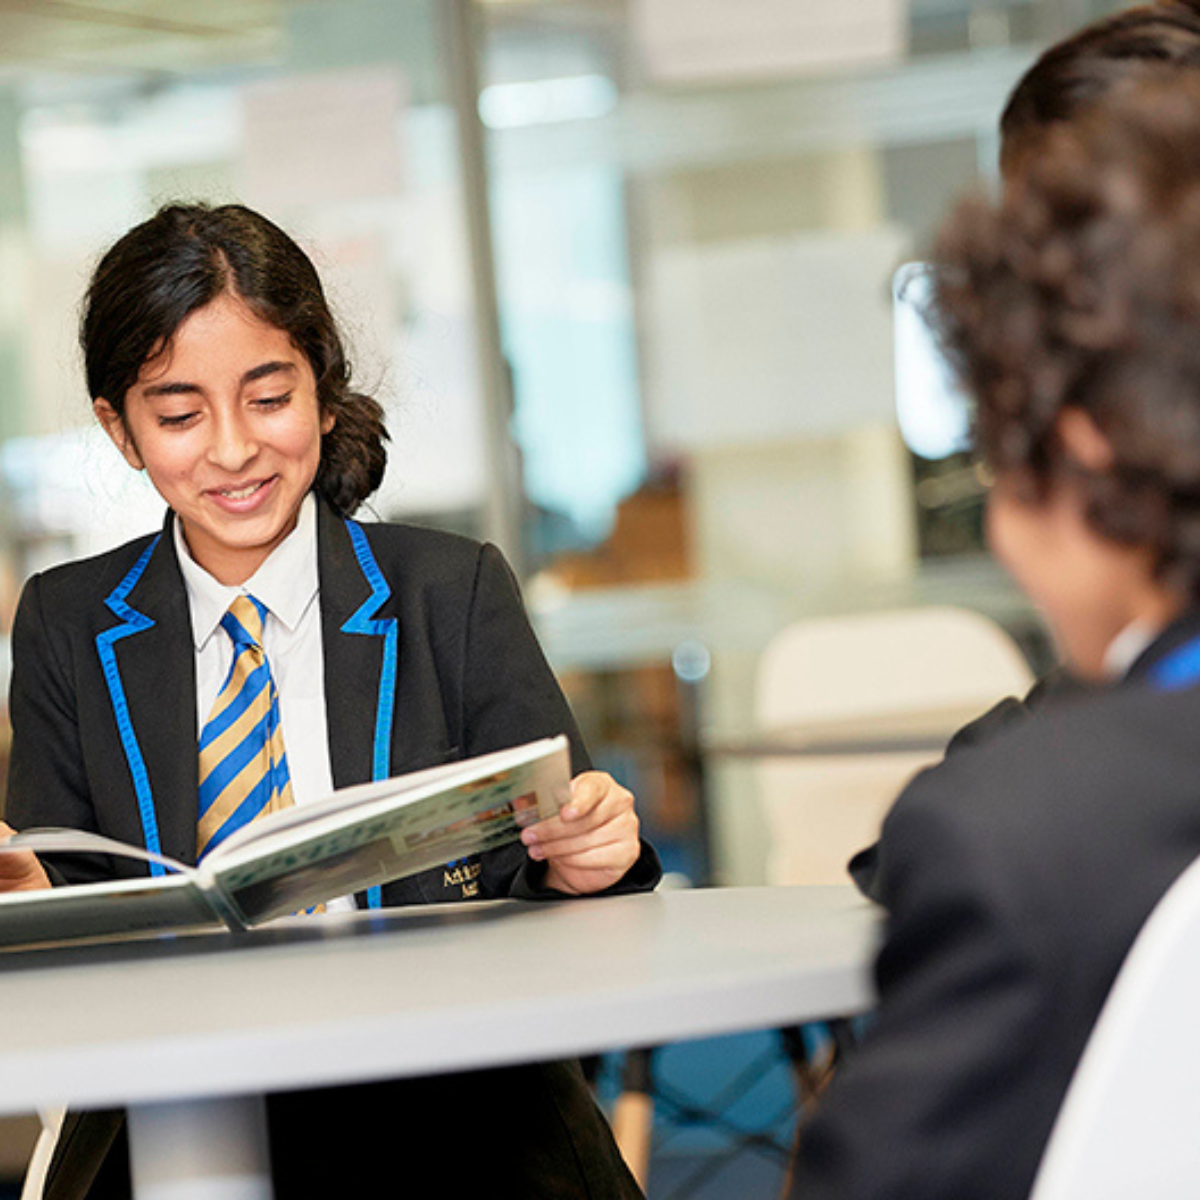 Bluecoat Aspley Academy: English Mastery is building a culture of reading and reflection in this school